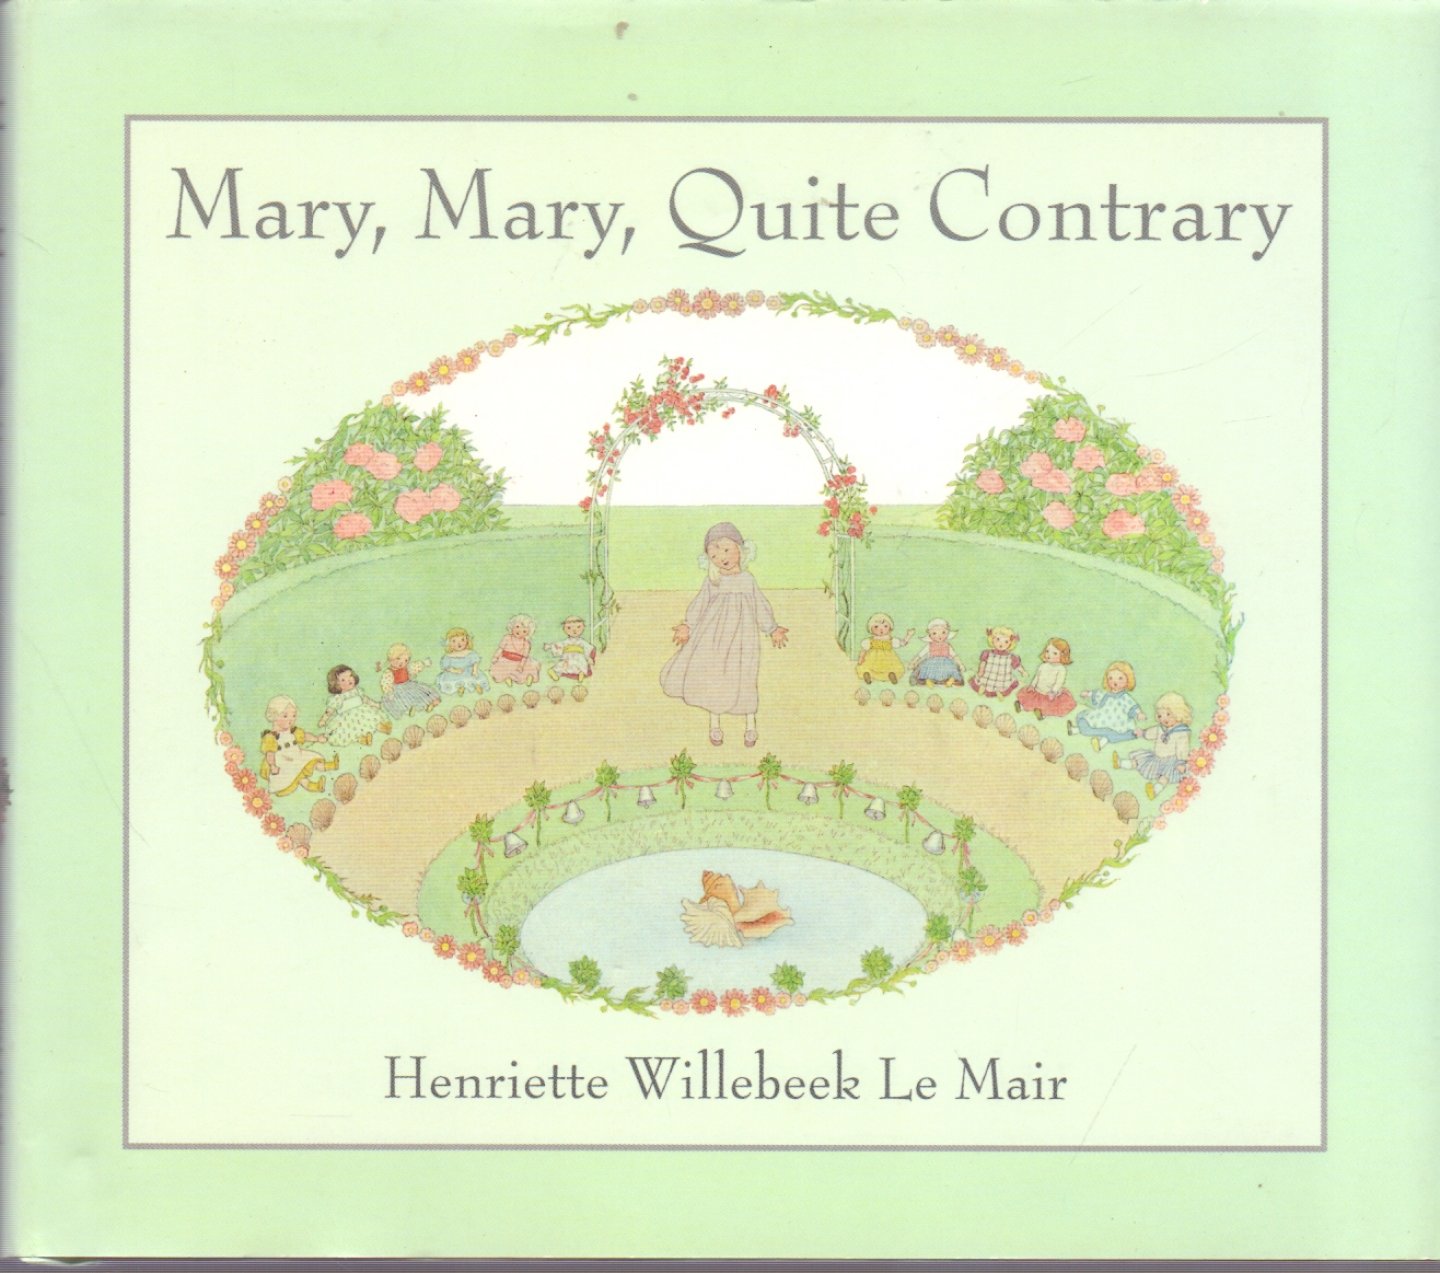 Willebeek Le Mair, Henriette (ds1258) - Mary, Mary, Quite Contrary